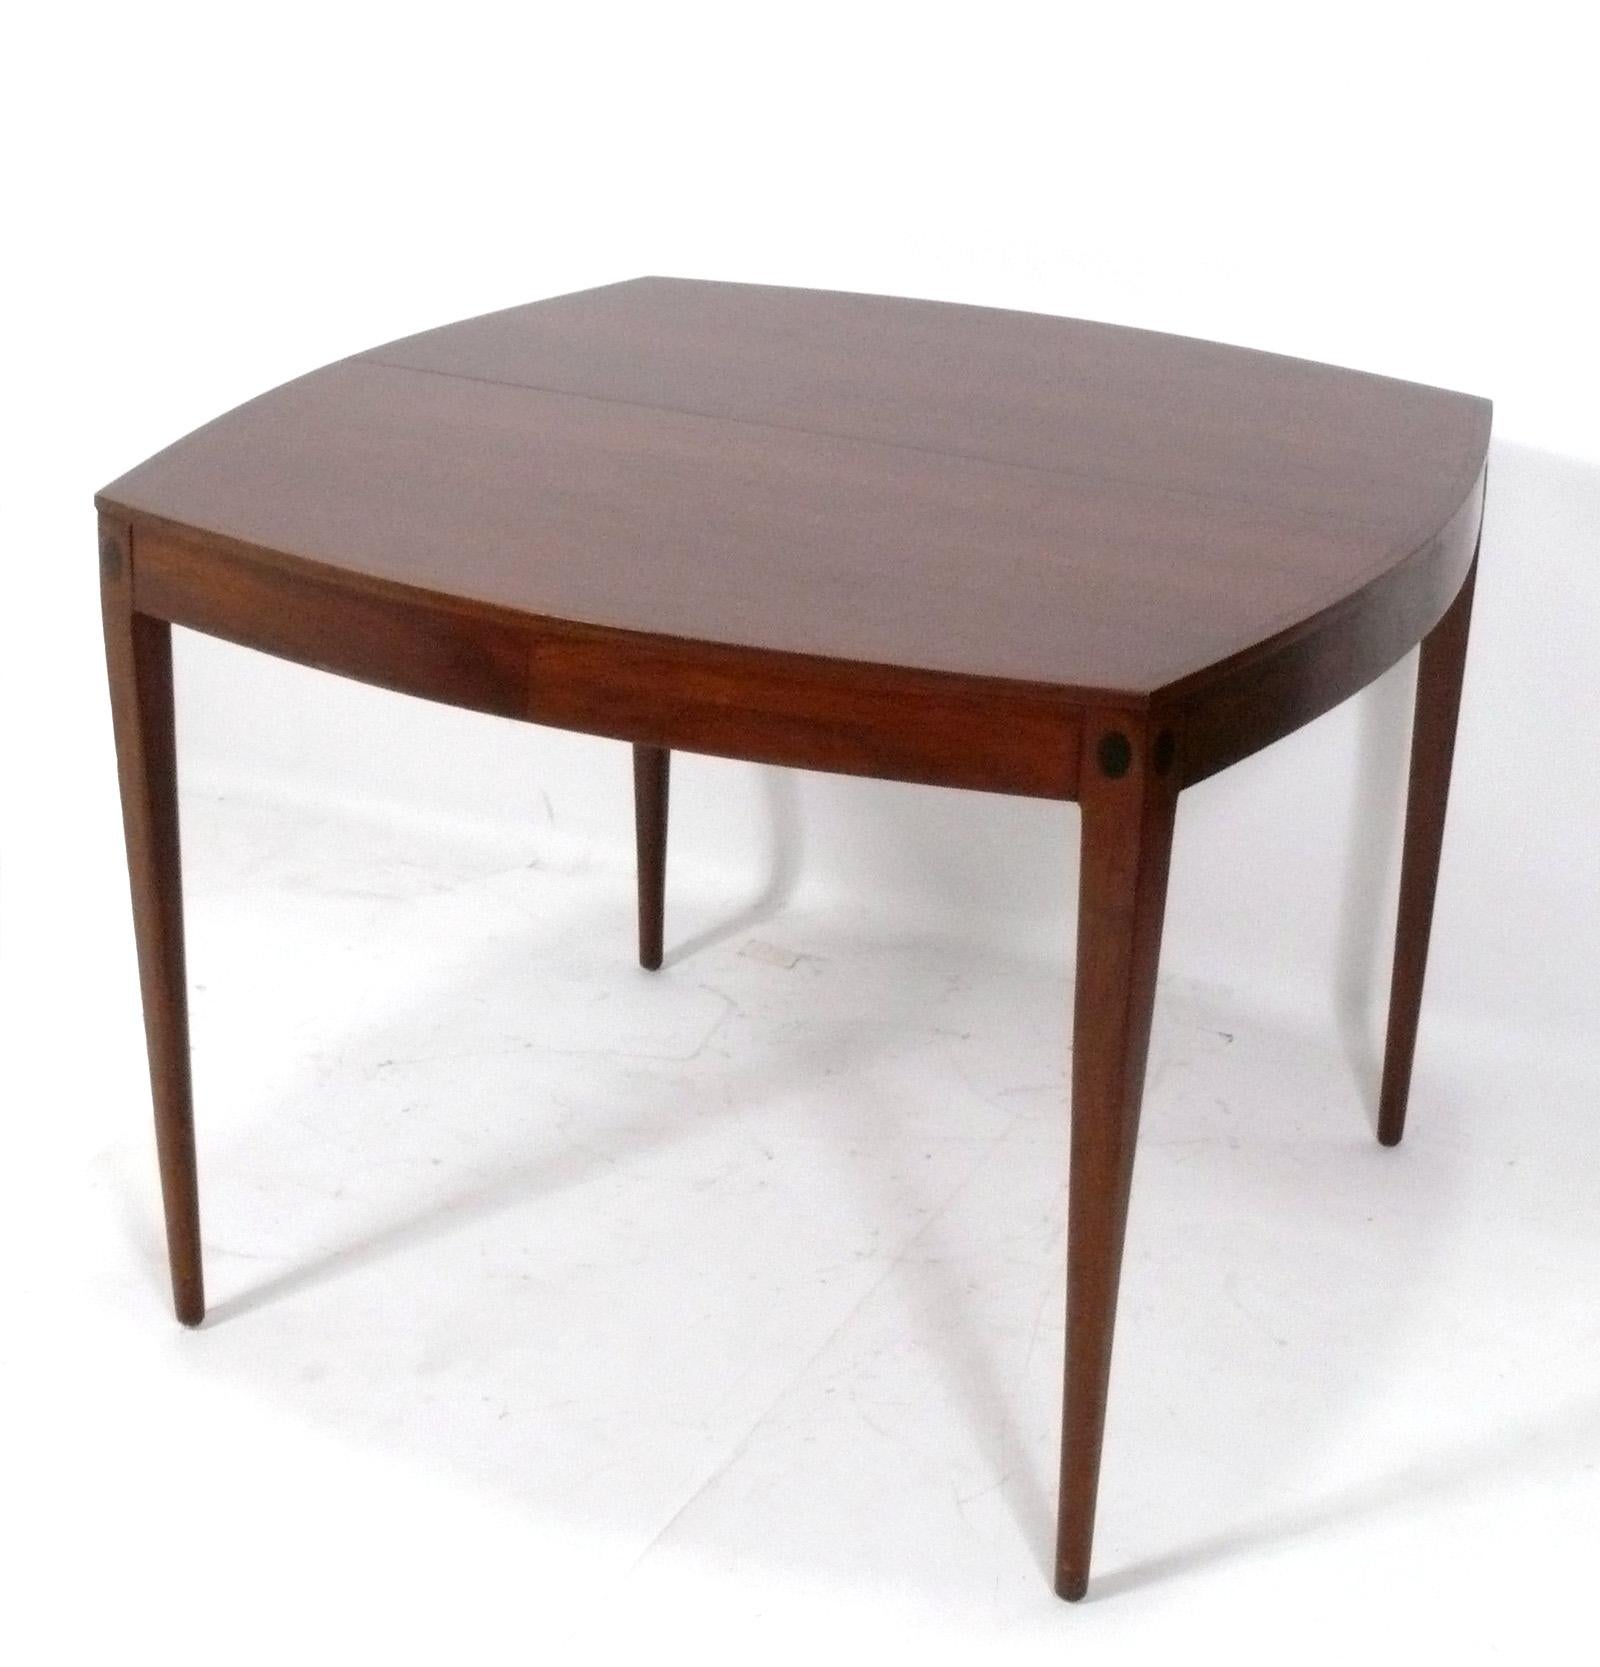 Outstanding midcentury walnut dining table, designed by Kipp Stewart for Directional, American, circa 1960s. Beautiful grained walnut throughout. It expands from a compact ovaled square to an impressive 82.25